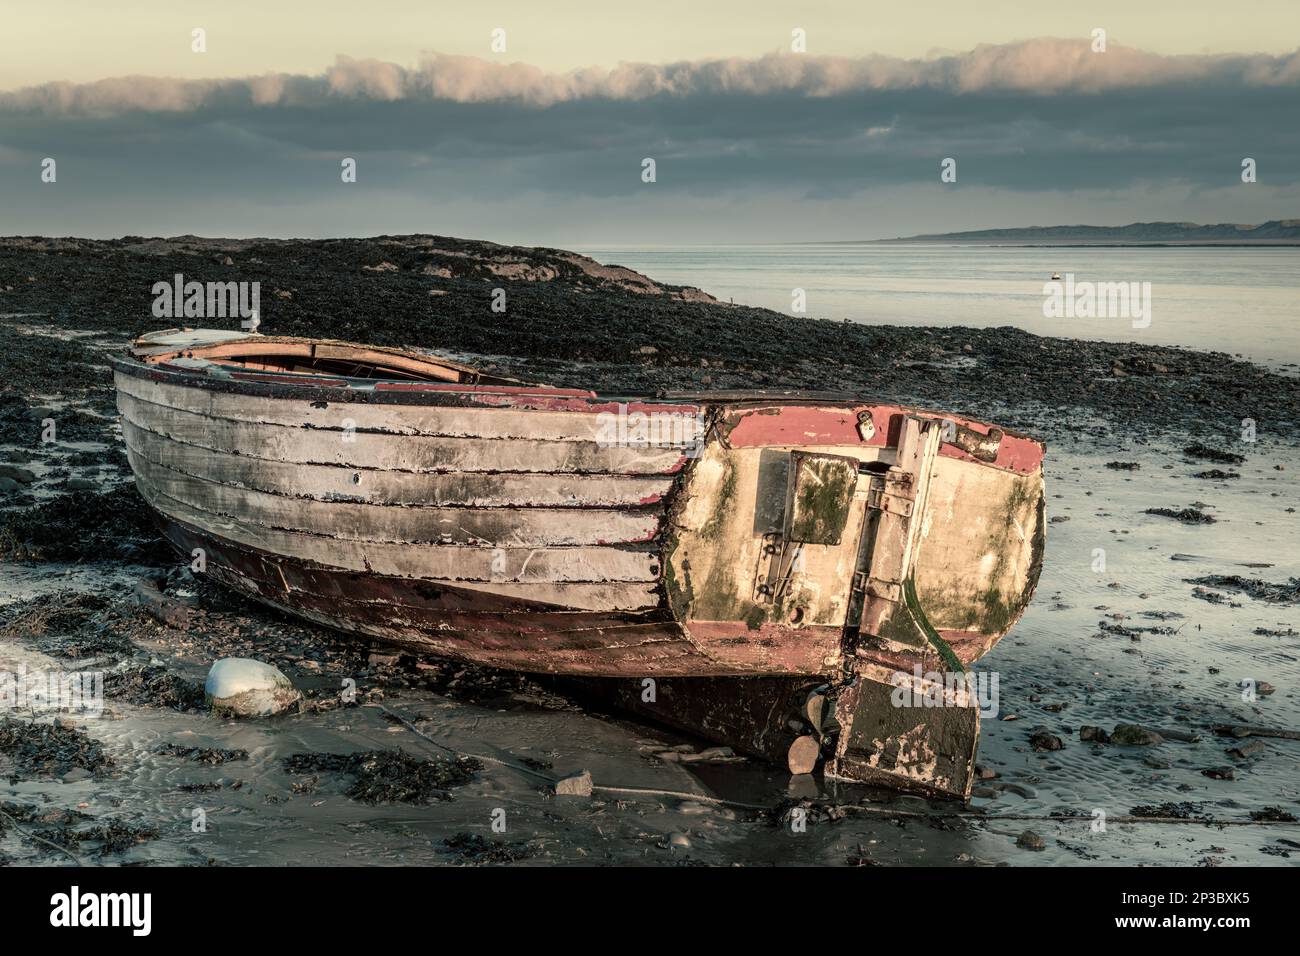 The remains of an abandoned wooden boat are left to decay on the shoreline of the River Torridge estuary in North Devon. Stock Photo